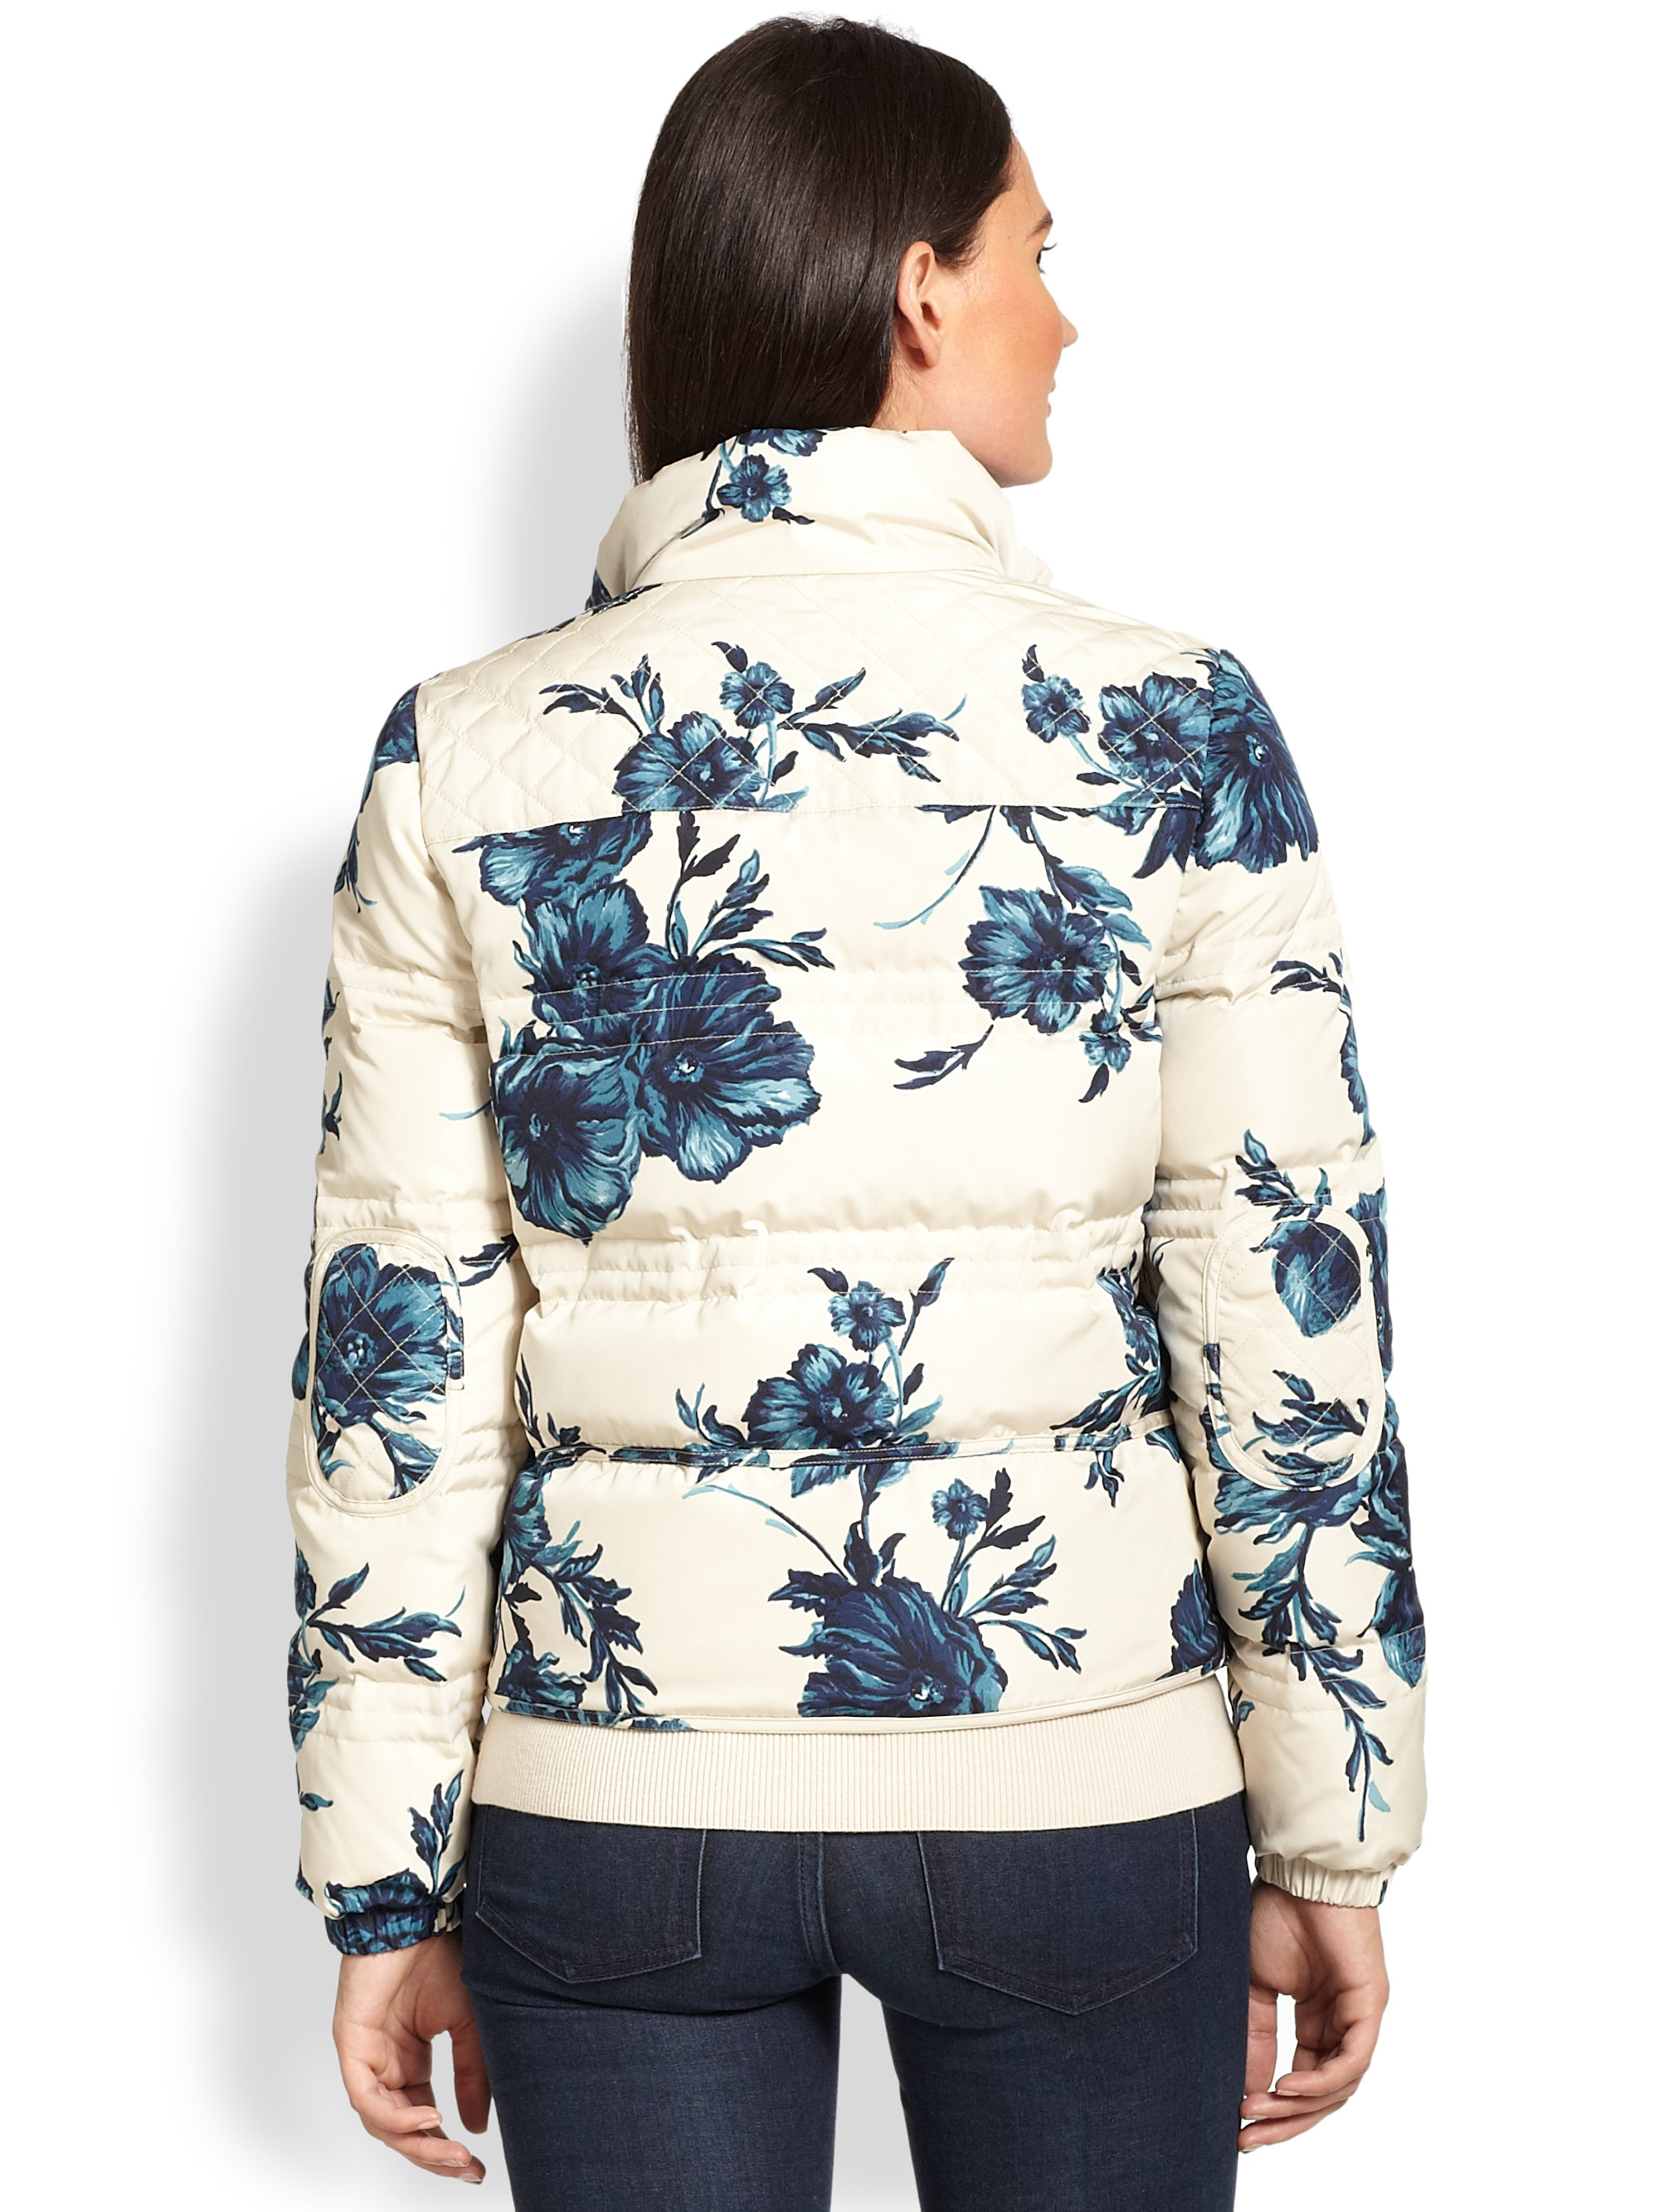 Lyst - Tory Burch Ronda Floral Puffer Jacket in Natural